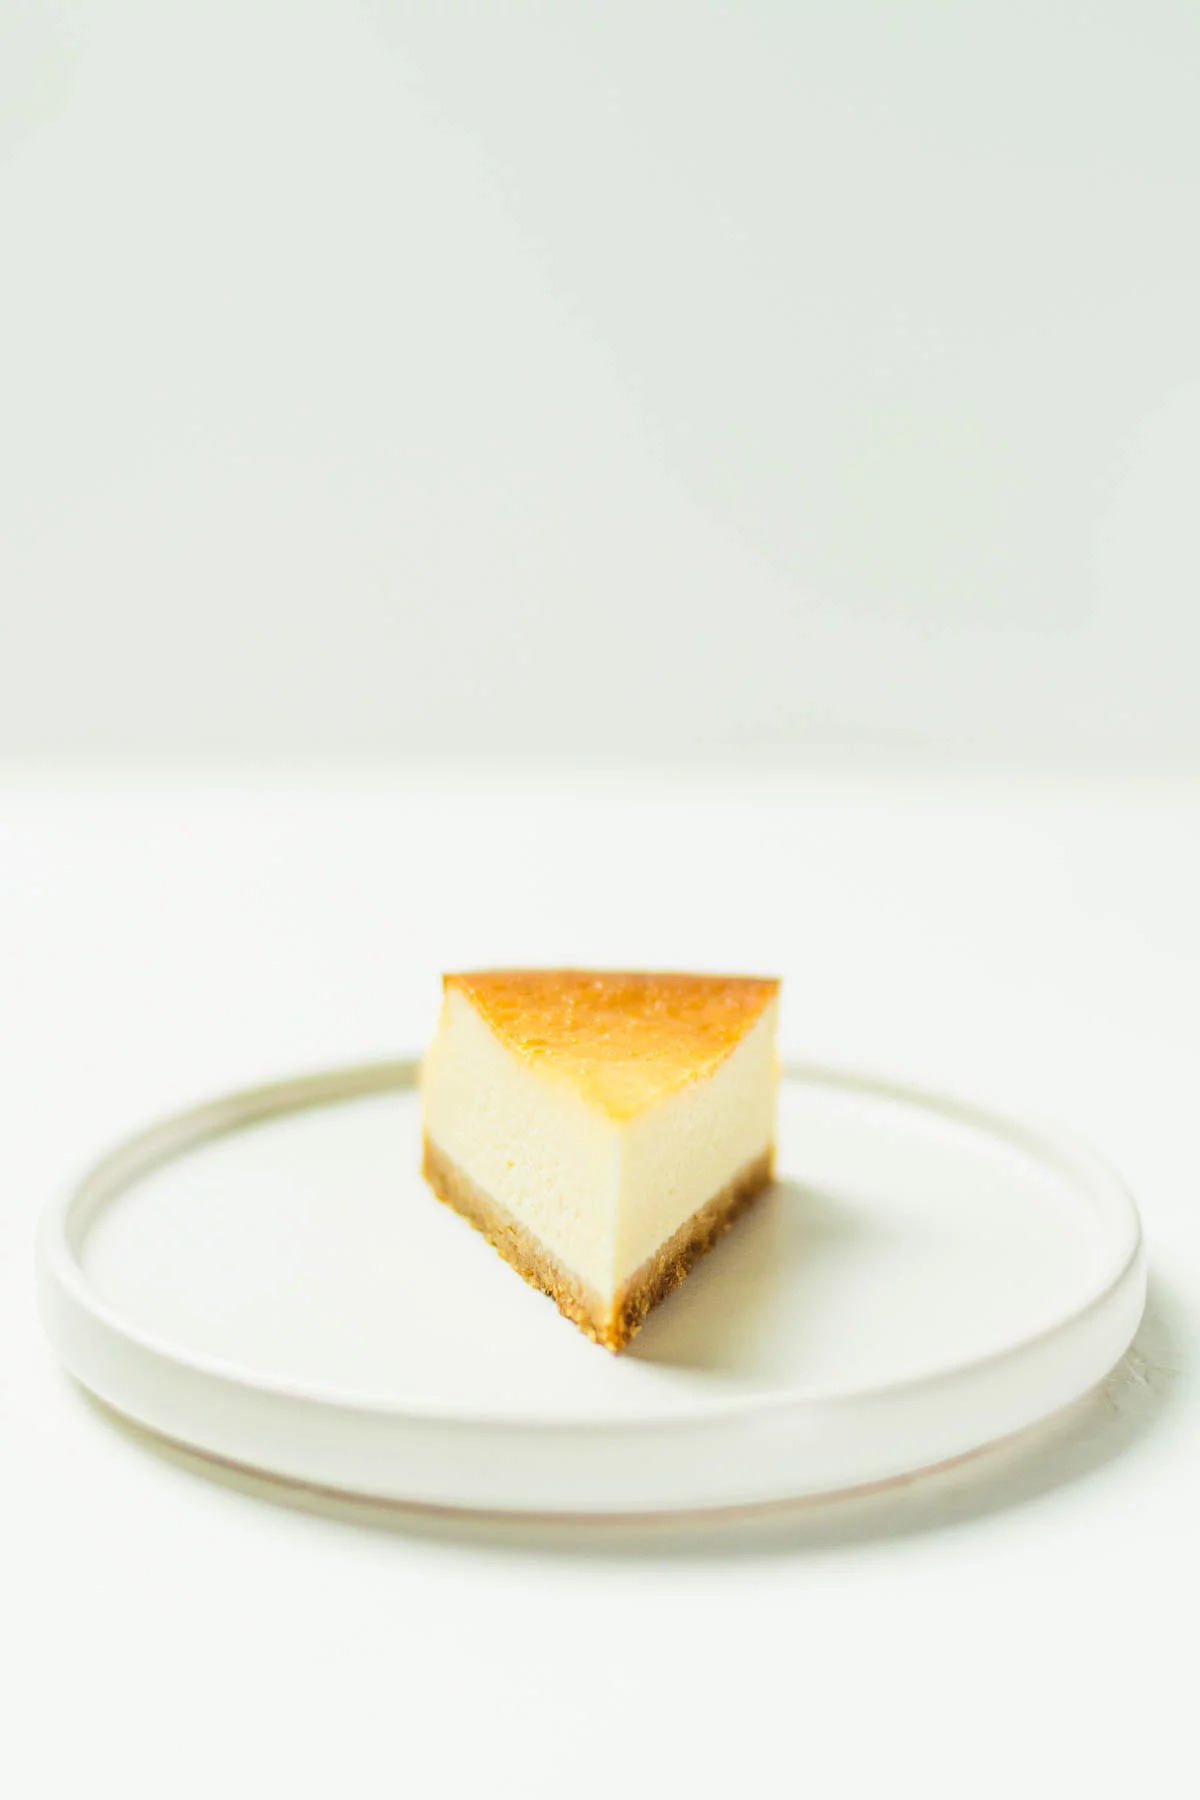 How to Make the Best Baked Cheesecake